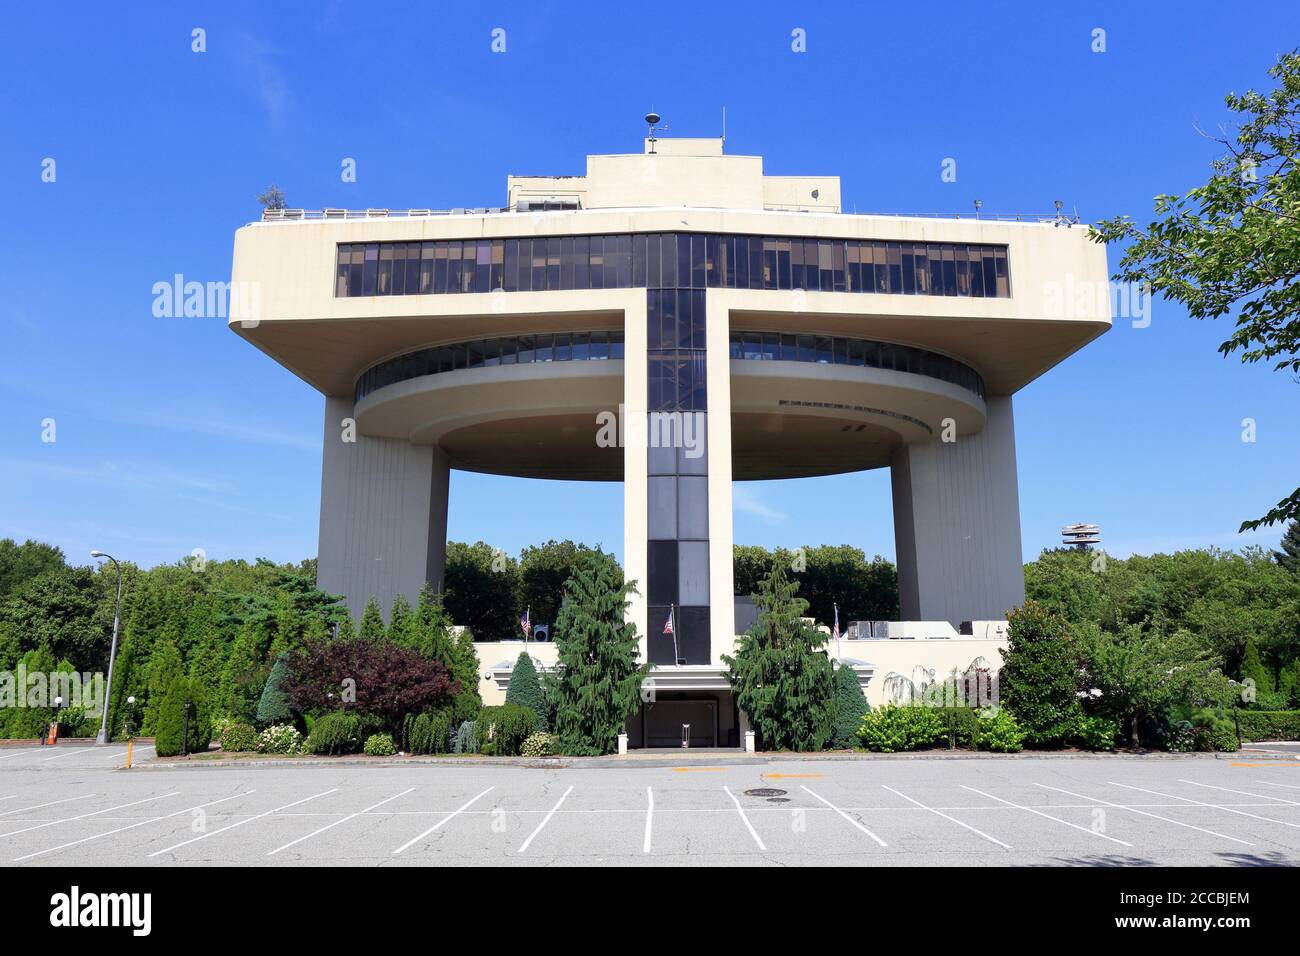 Terrace On The Park, 52-11 111th Street, Queens, NY. exterior of a banquet hall former 1964 New York World's Fair heliport at Flushing Meadows Stock Photo